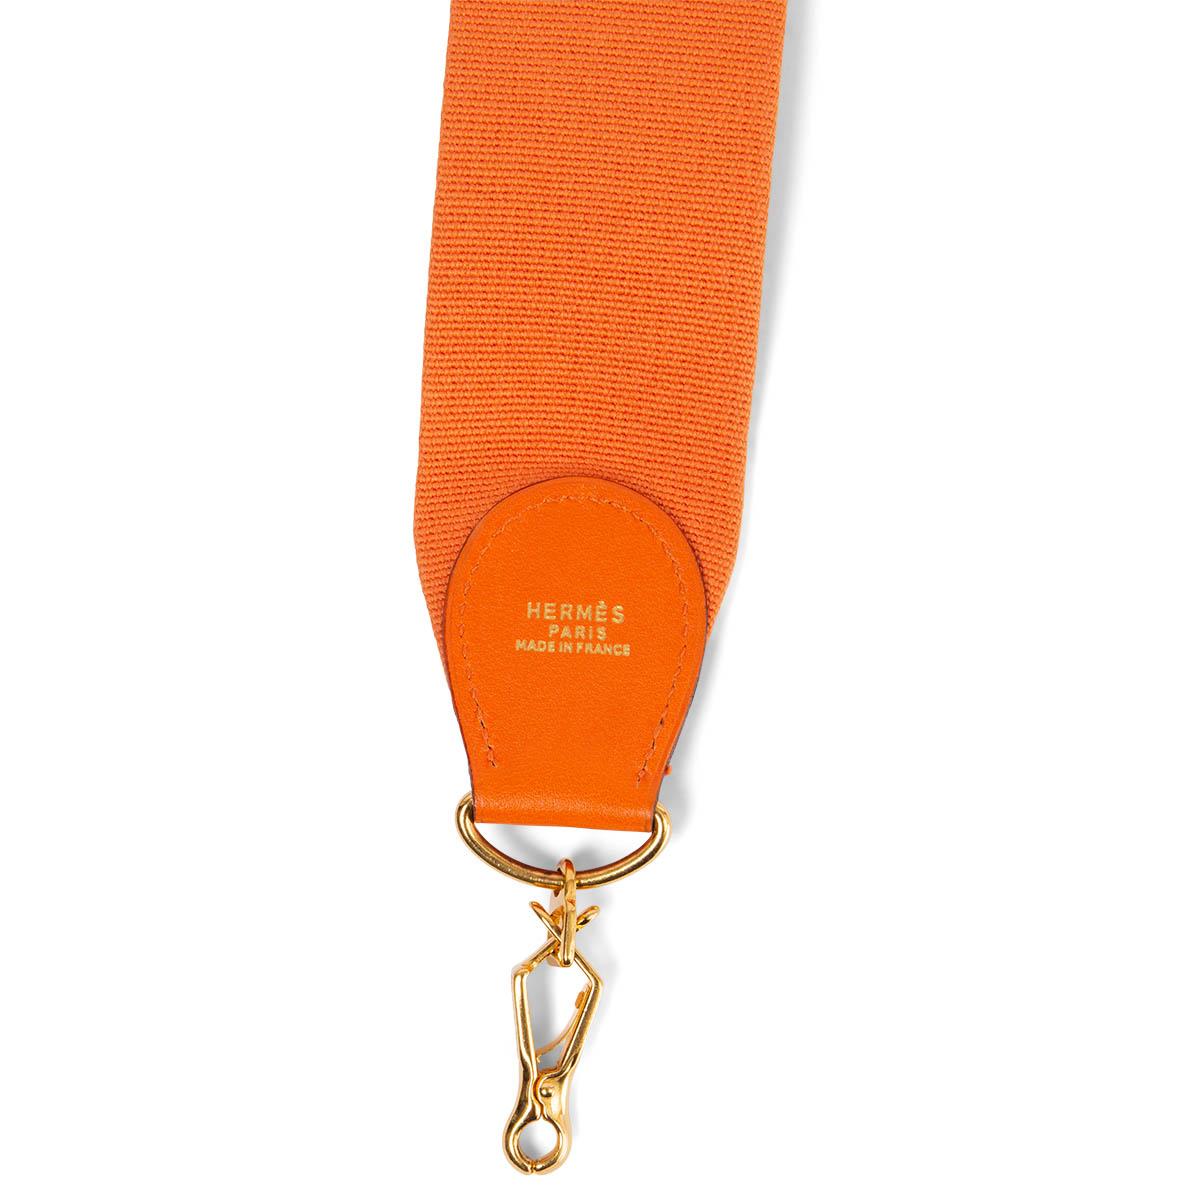 100% authentic Hermès shoulder strap for your Kelly or Evelyne bag in orange canvas and Gulliver leather. Has been carried and is in excellent condition.

Measurements
Width	5cm (2in)
Length	110cm (42.9in)
Hardware	Gold-Tone

All our listings